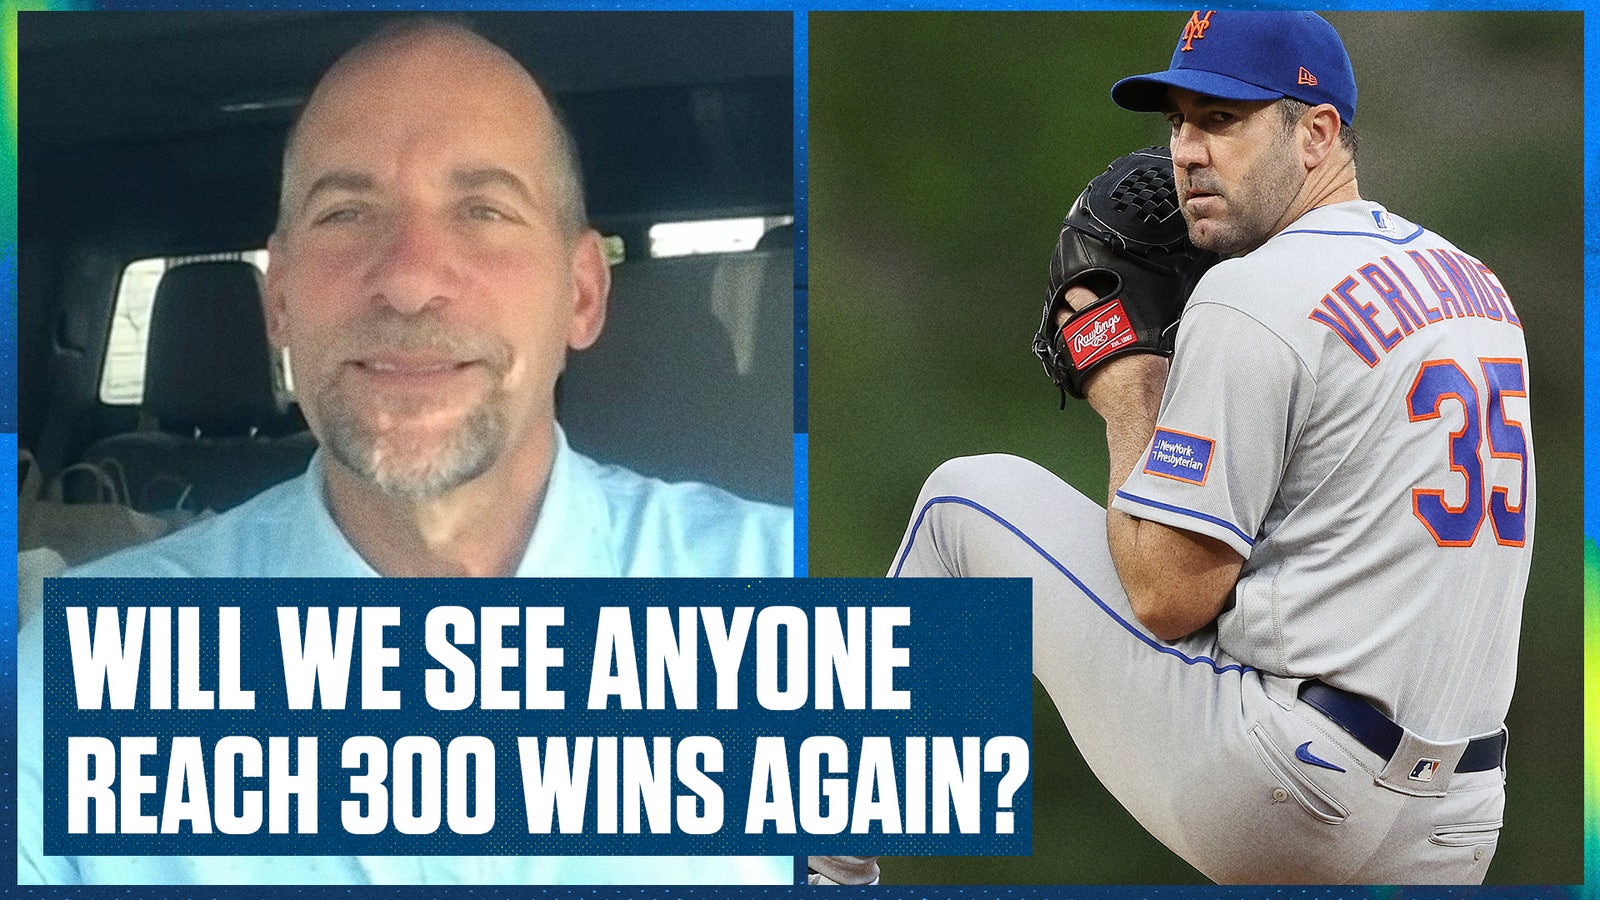 Mets' Justin Verlander is close, but will anyone reach 300 wins again?